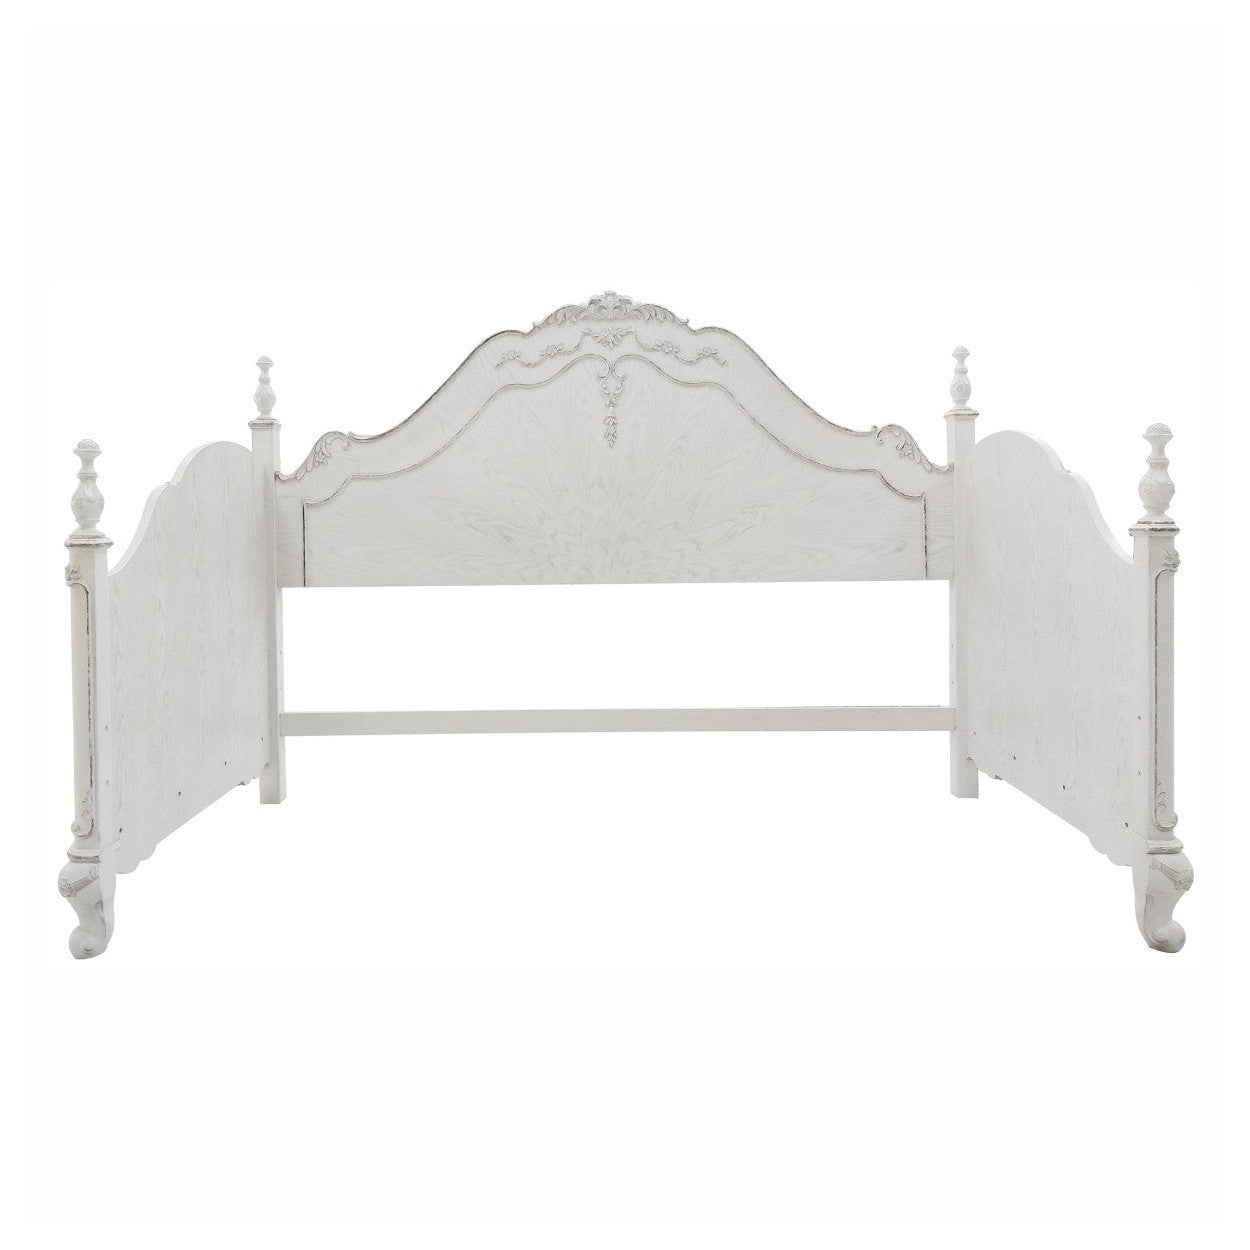 (2) DAYBED, LINKSPRING REQUIRED 1386DNW*